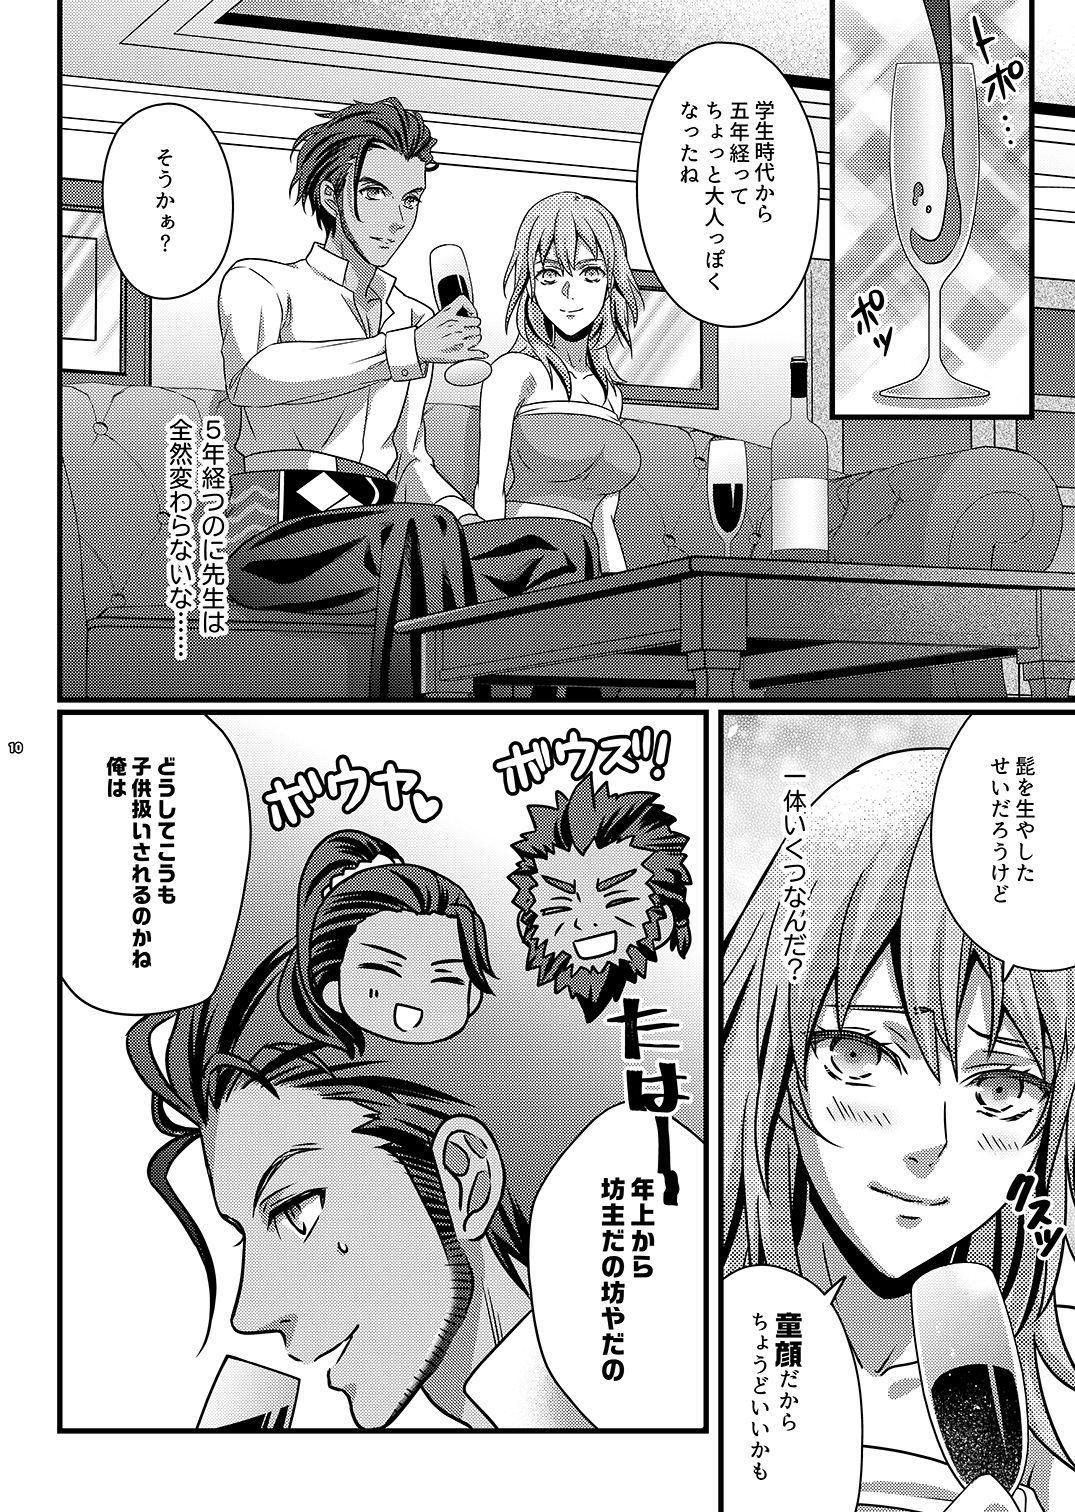 Athletic Yoake no Joukei - Fire emblem three houses Gay Shaved - Page 9